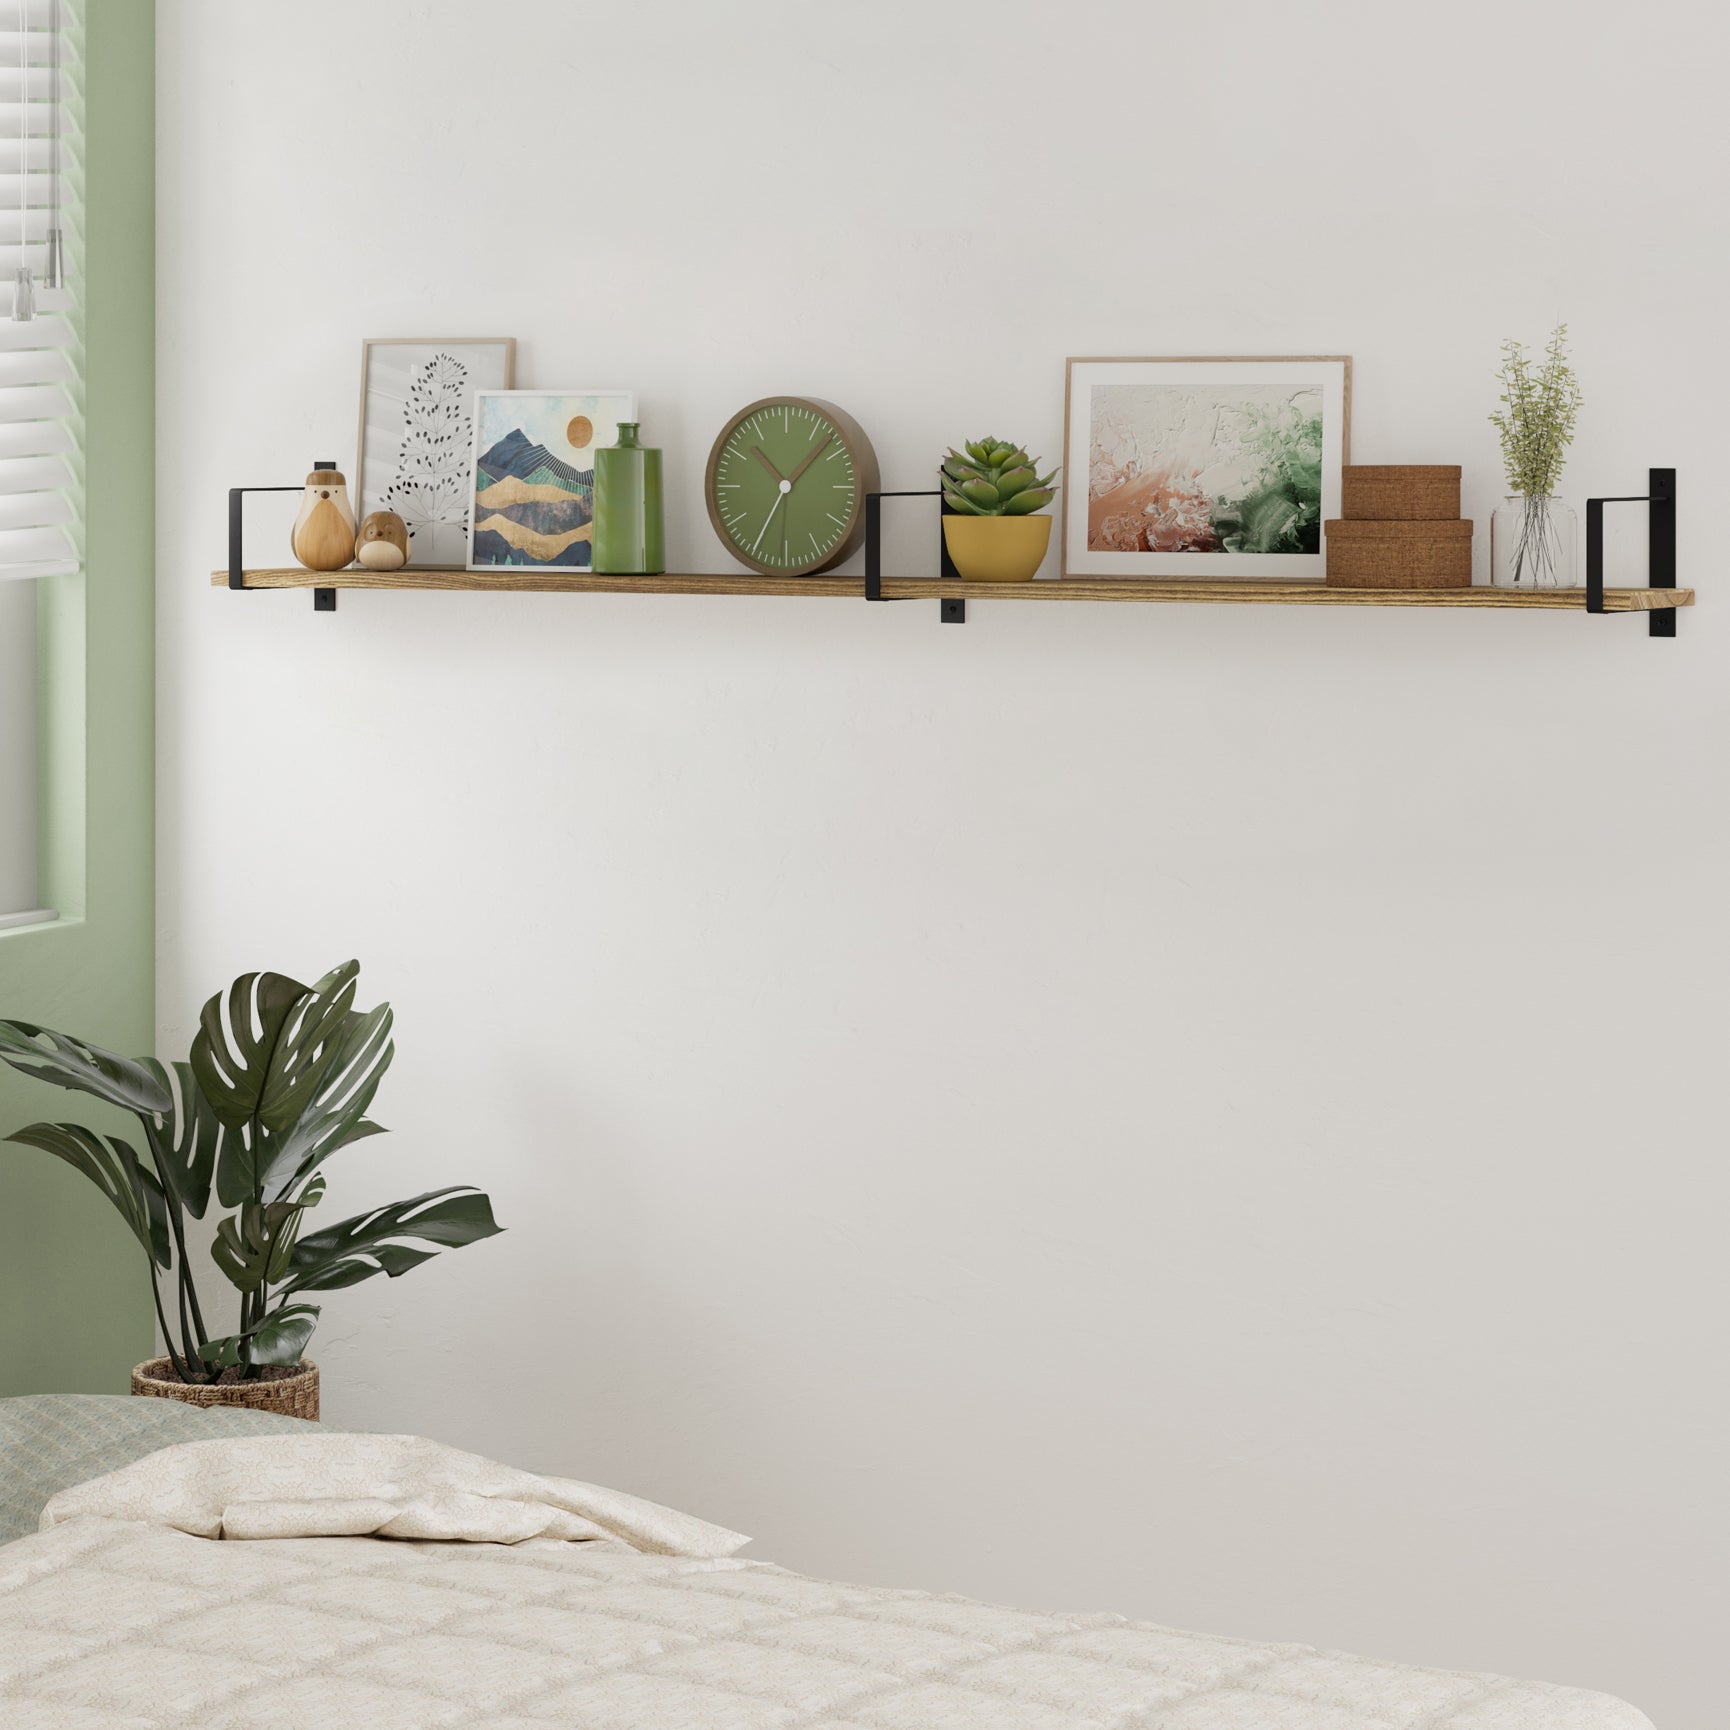 Styled long floating shelf burnt in a bedroom setting, decorated with art and plants.